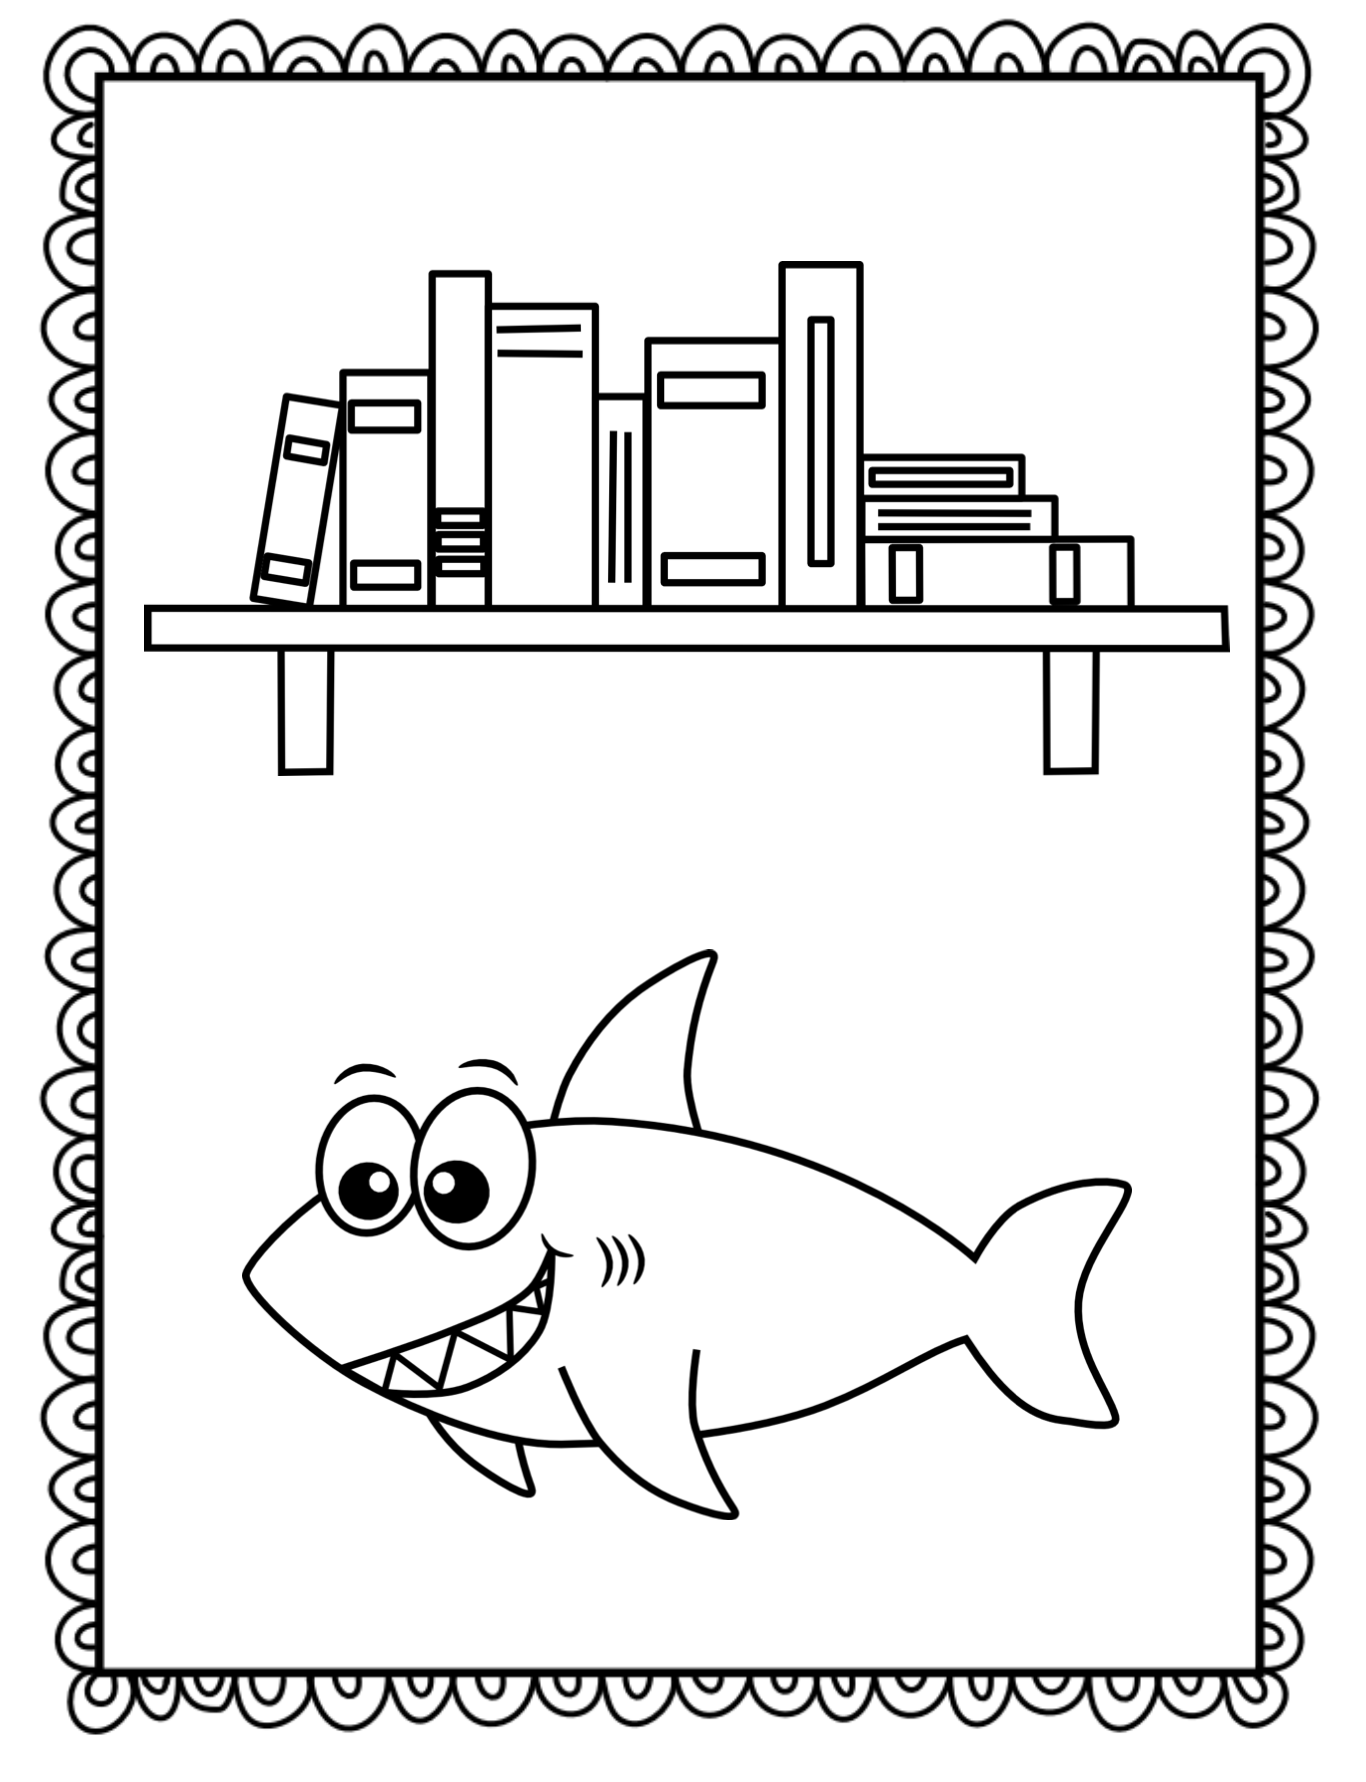 sh sound coloring pages